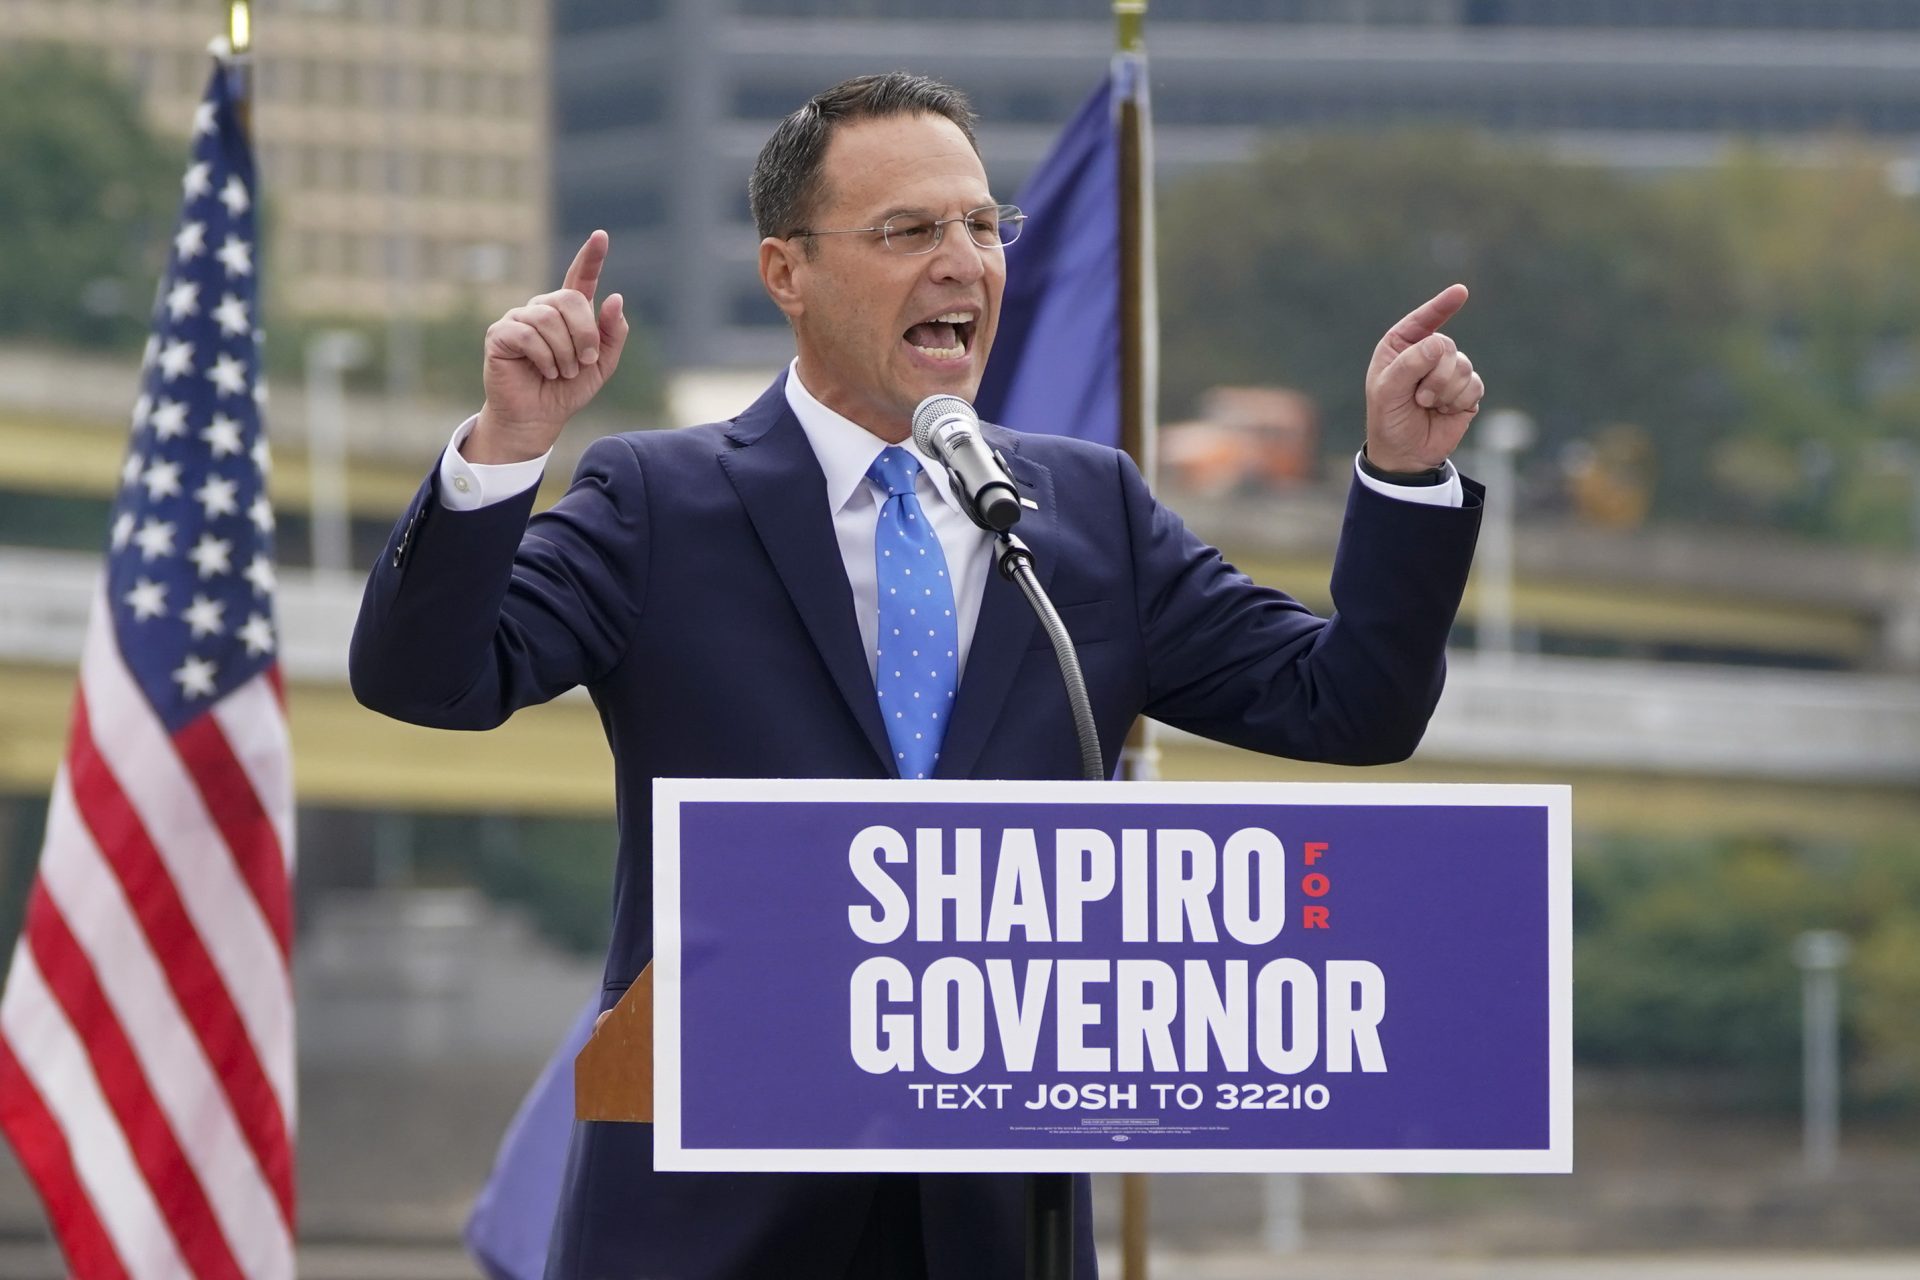 In this Oct. 13, 2021 file photo, Pennsylvania's Democratic attorney general Josh Shapiro speaks to a crowd during his campaign launch address for Pennsylvania governor, in Pittsburgh.